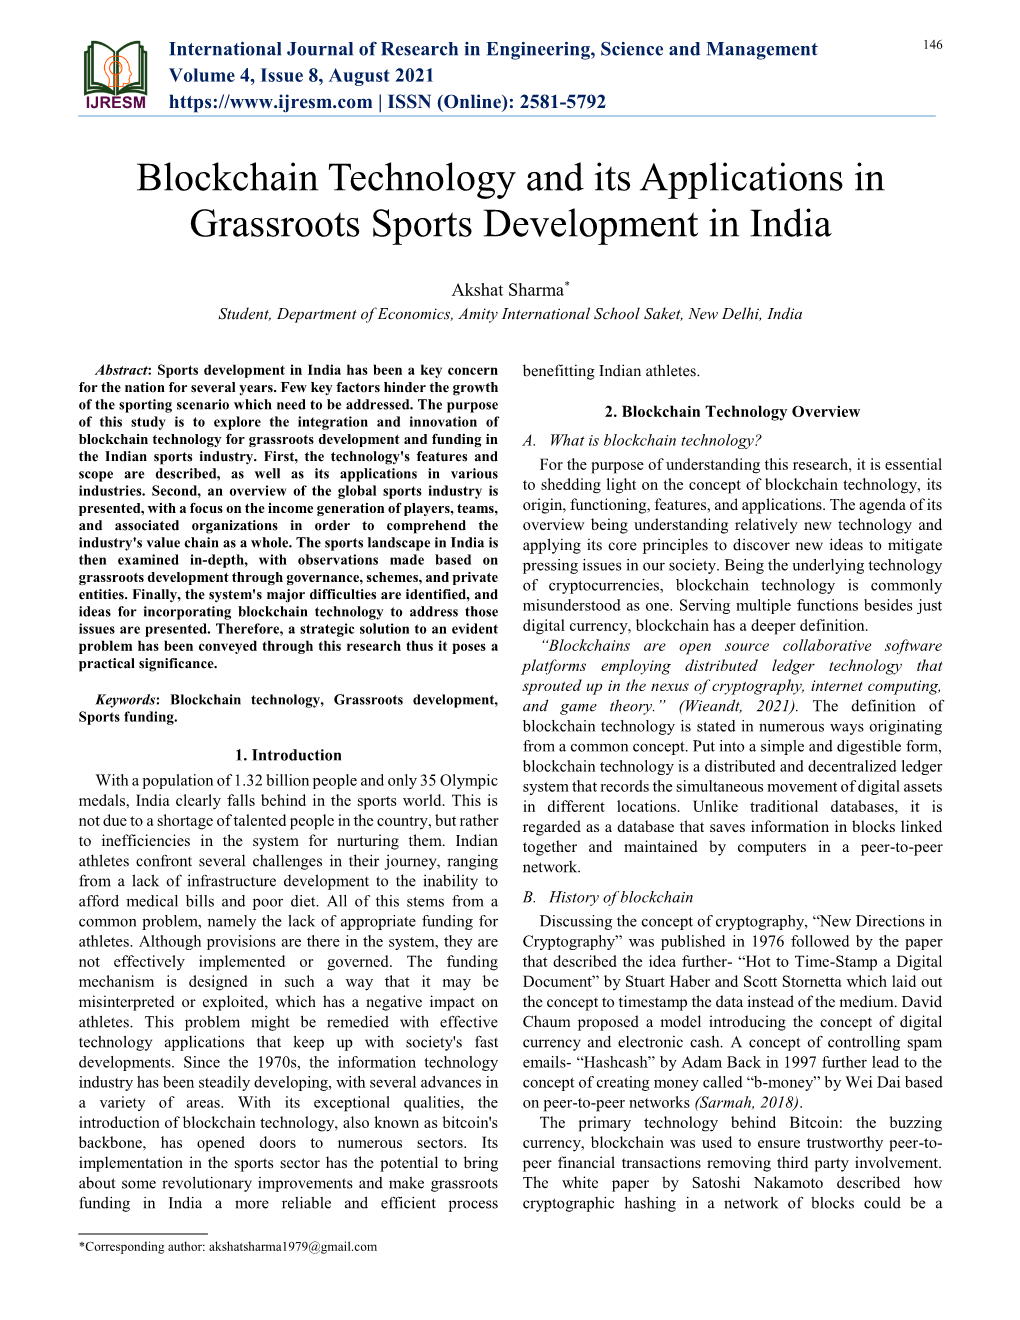 Blockchain Technology and Its Applications in Grassroots Sports Development in India